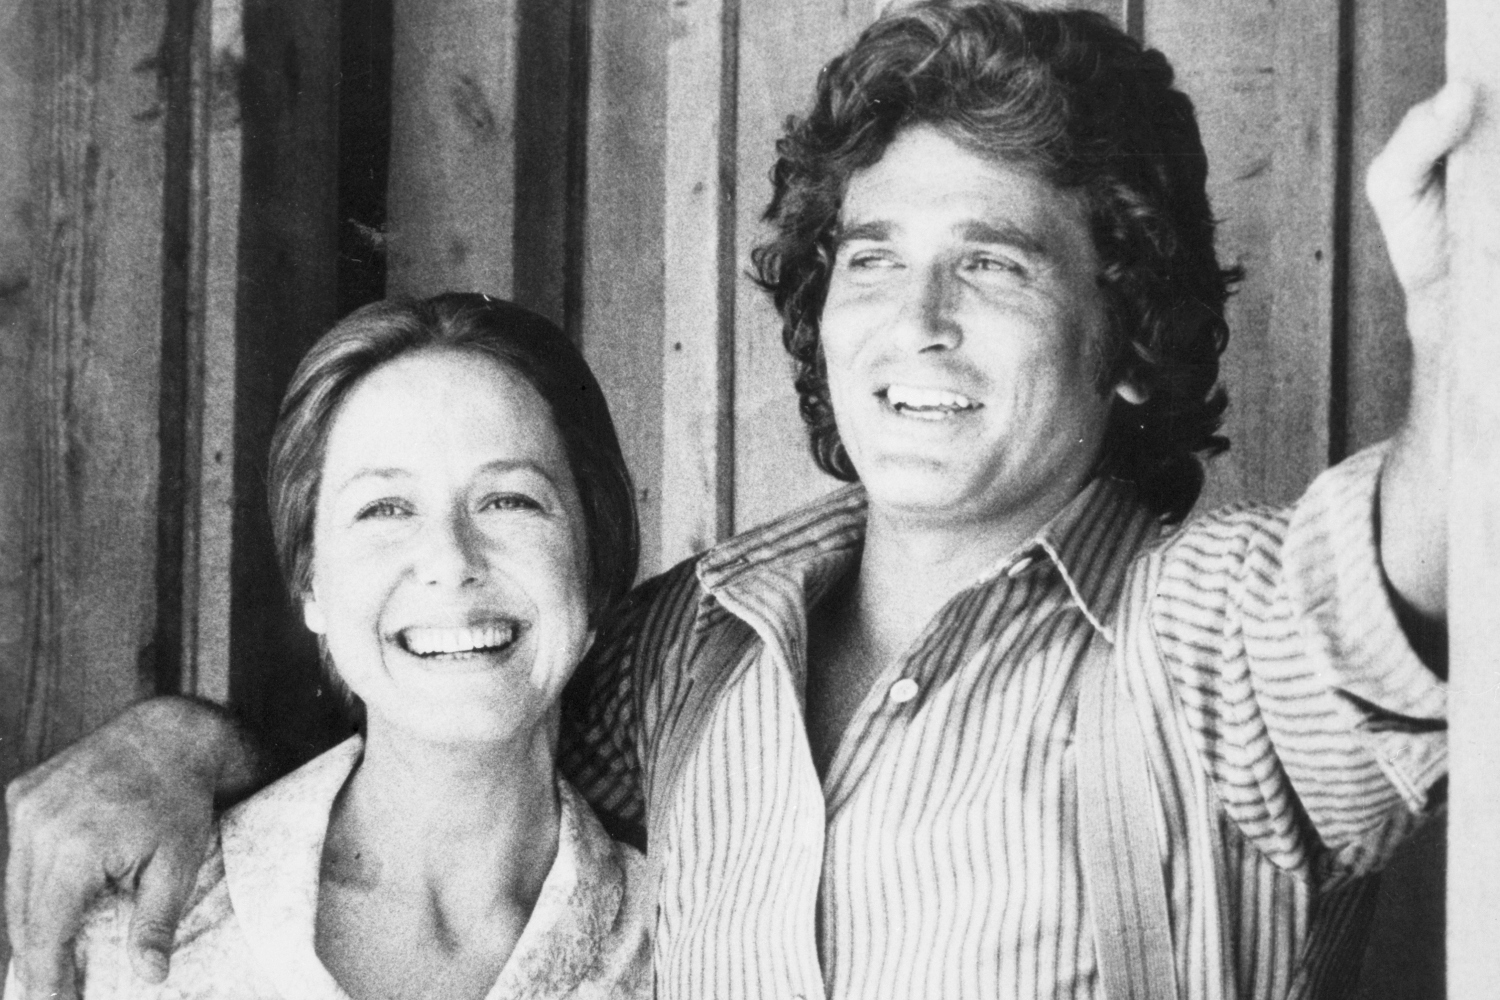 Little House on the Prairie Co-Stars Michael Landon and Karen Grassle. Landon supposedly spoke about his sex life a lot on set.